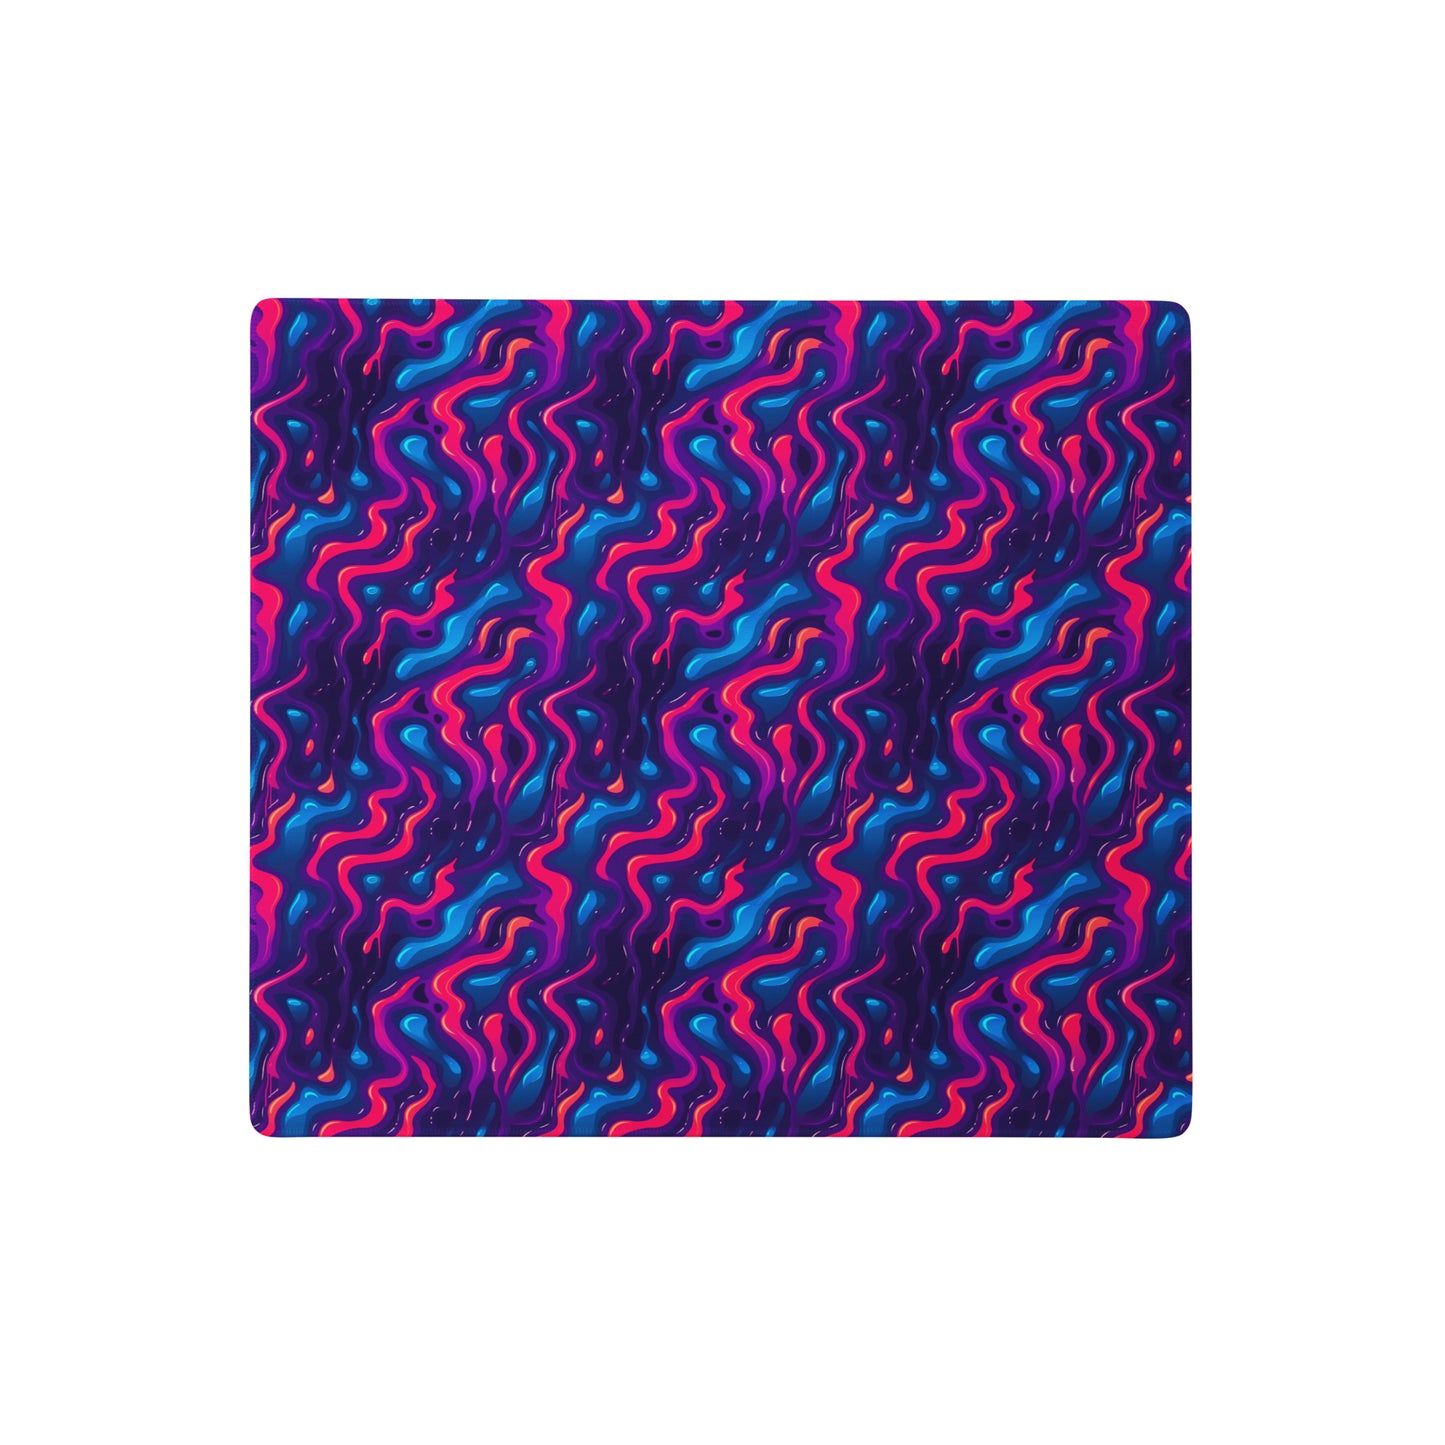 A 18" x 16" desk pad with a pink, blue and purple wavy pattern.